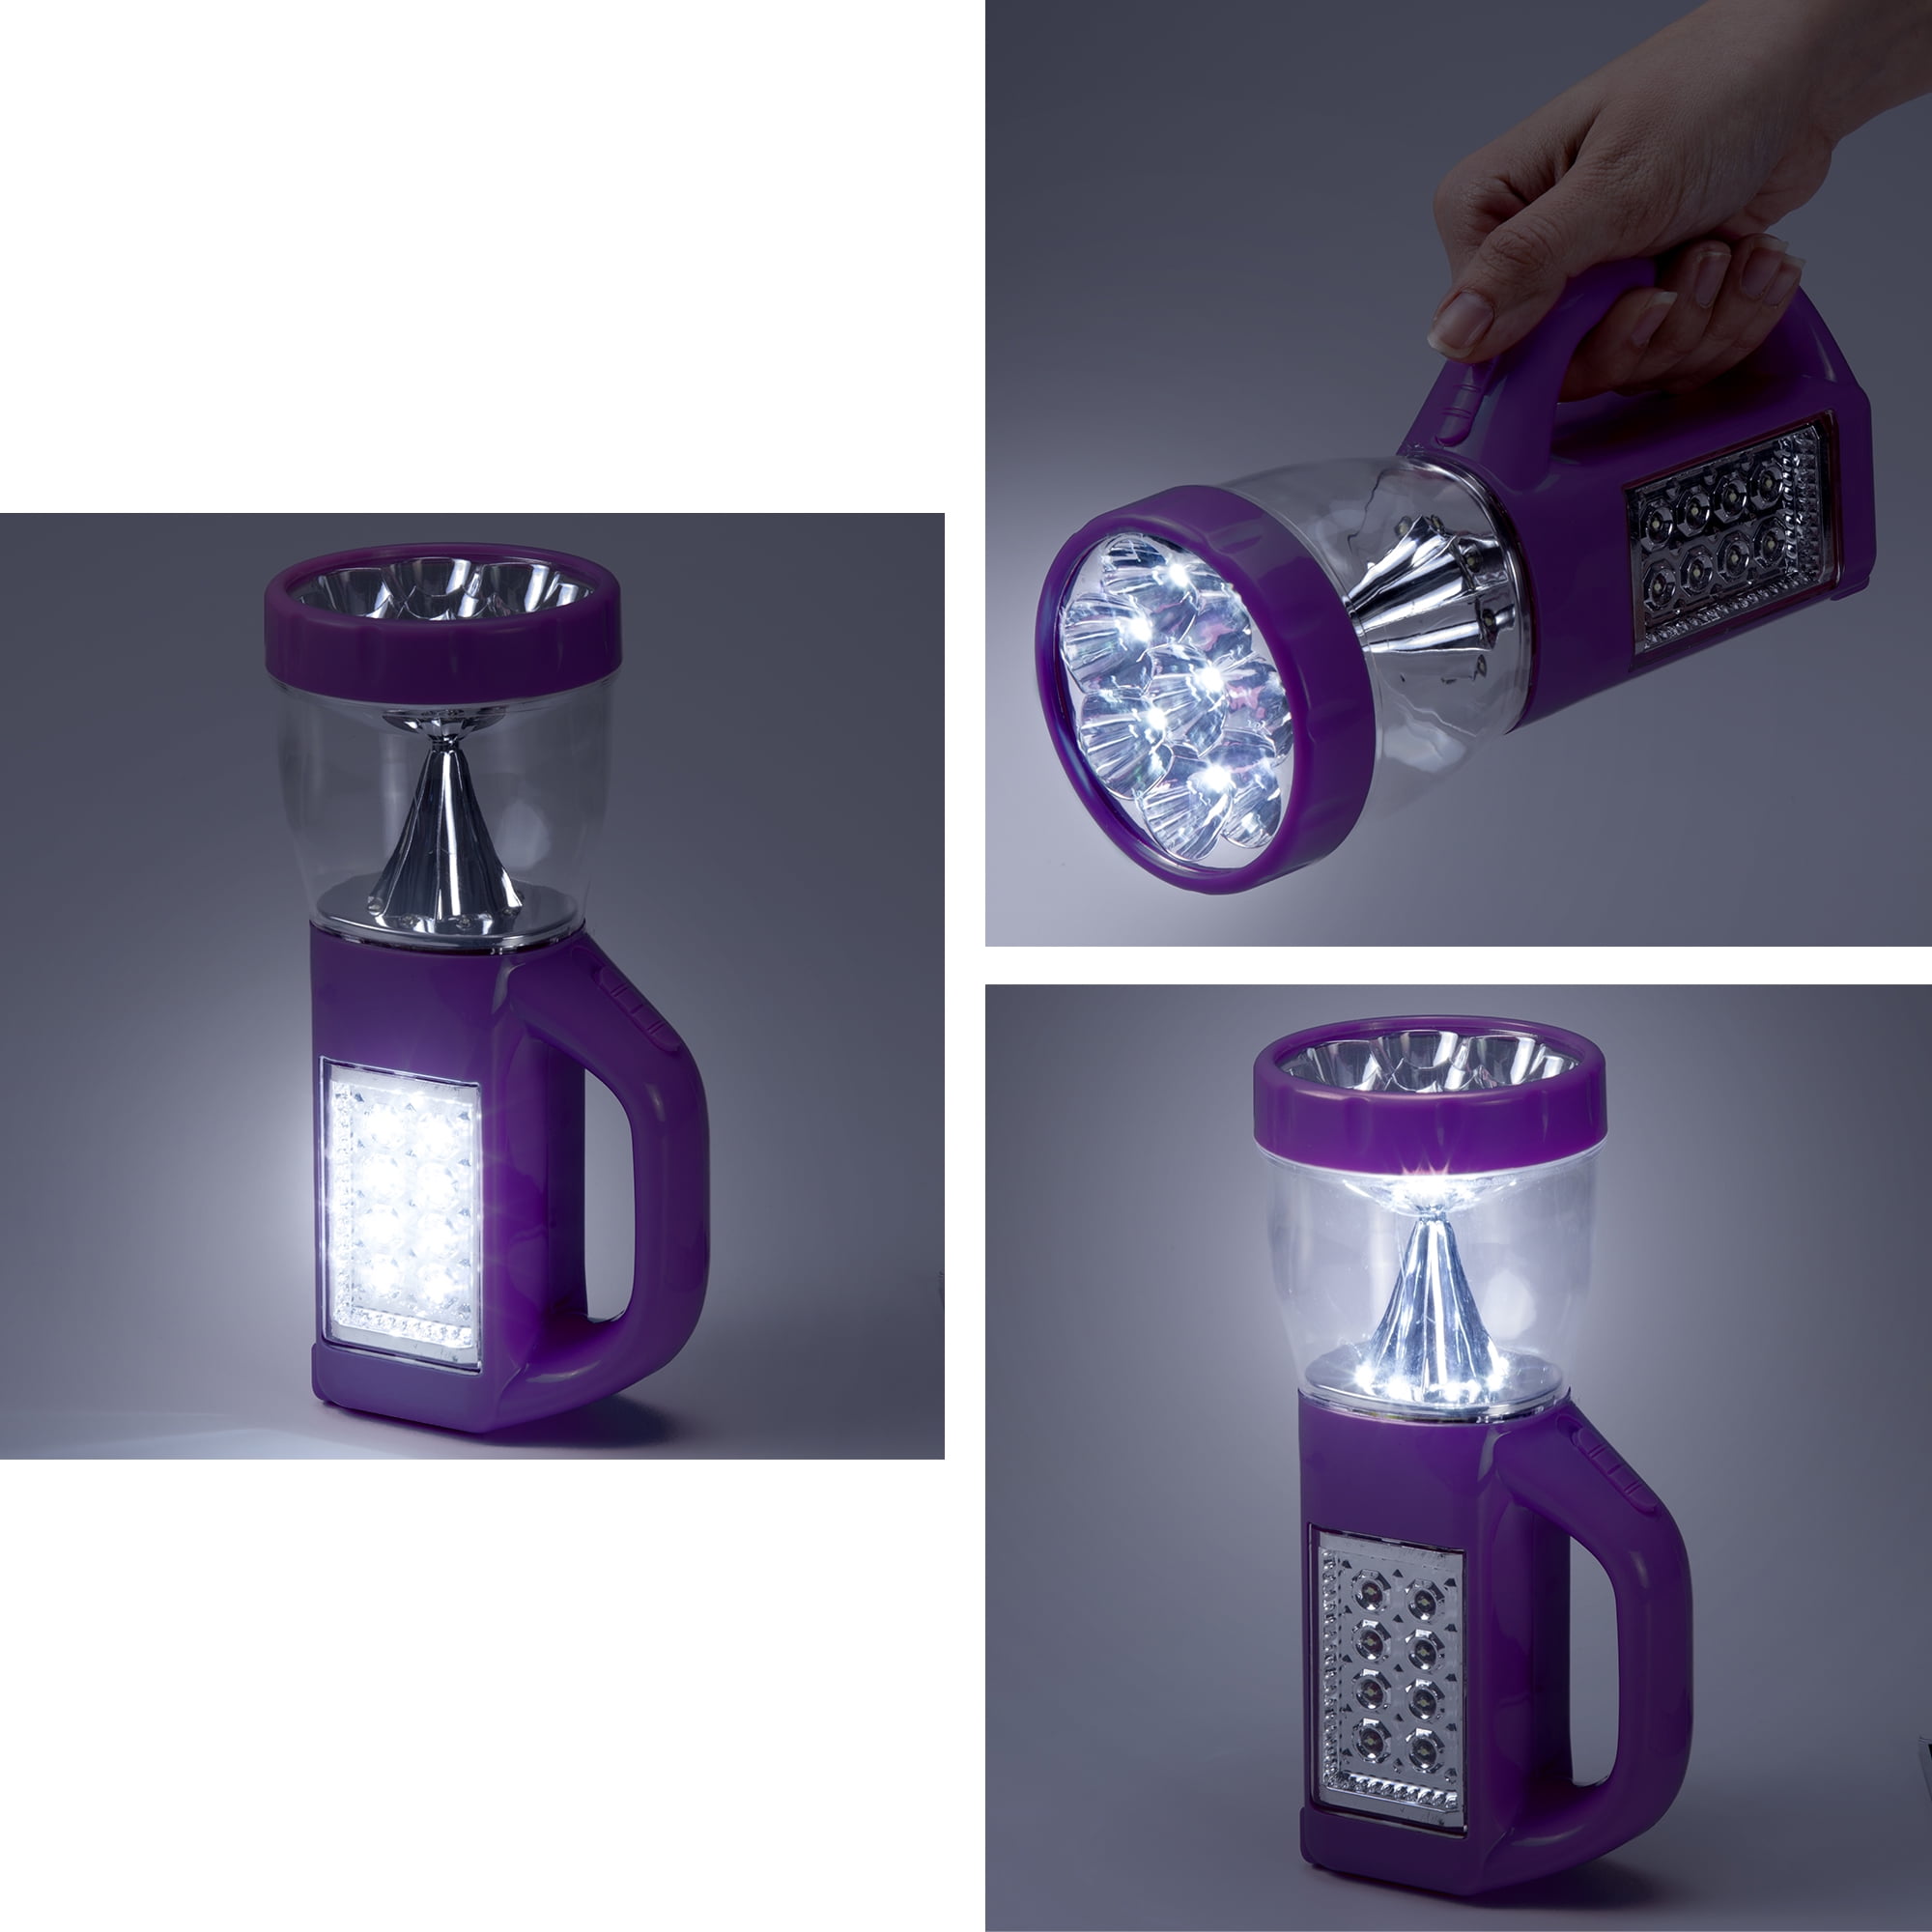 H11 3-in-1 multifunctional camping light, 3 colour temperatures